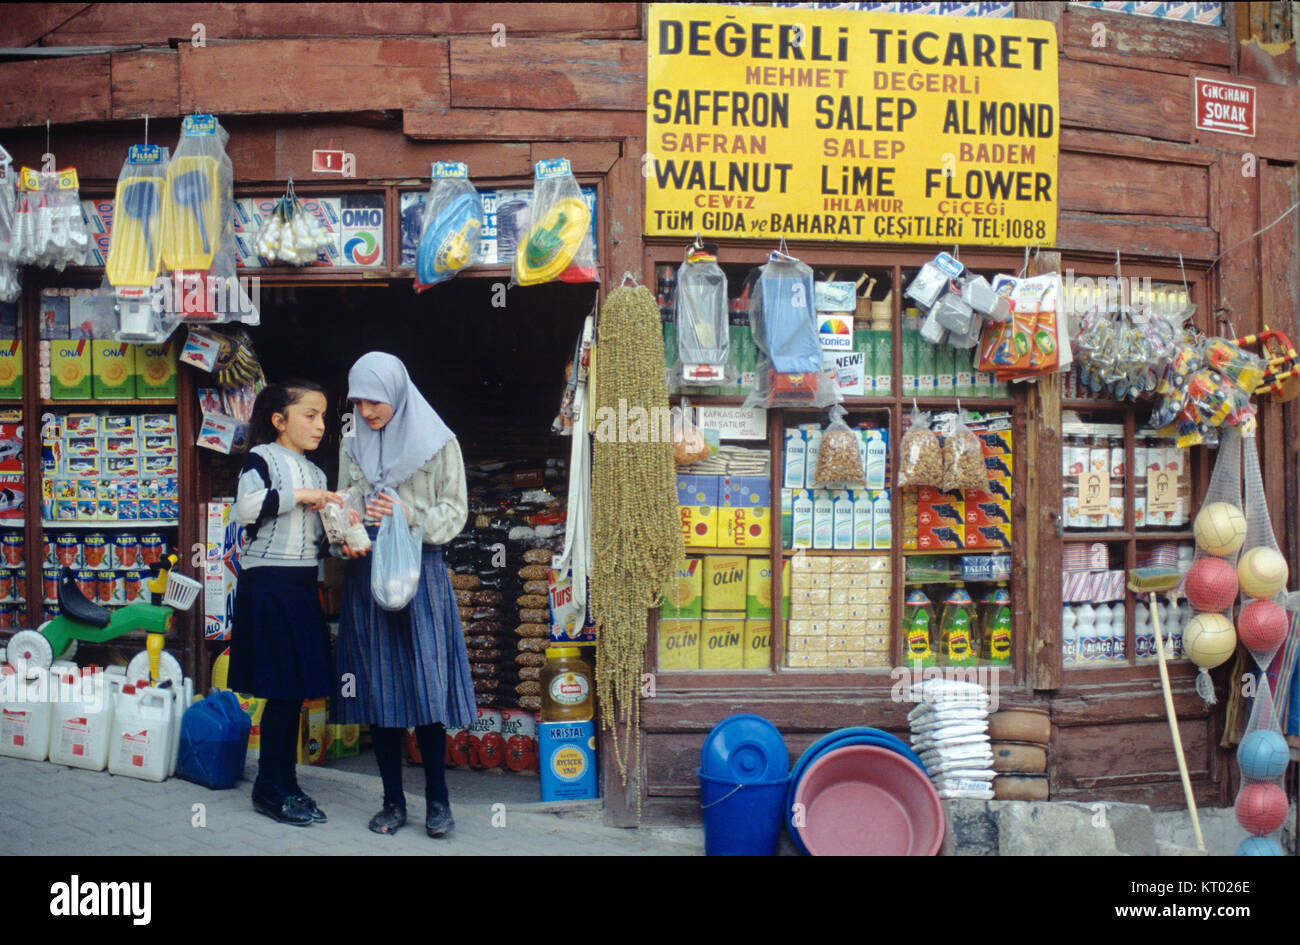 Two Turkish Girls Outside a Traditional Convenience Store, General Store or Corner Shop, Safranbolu, Turkey Stock Photo